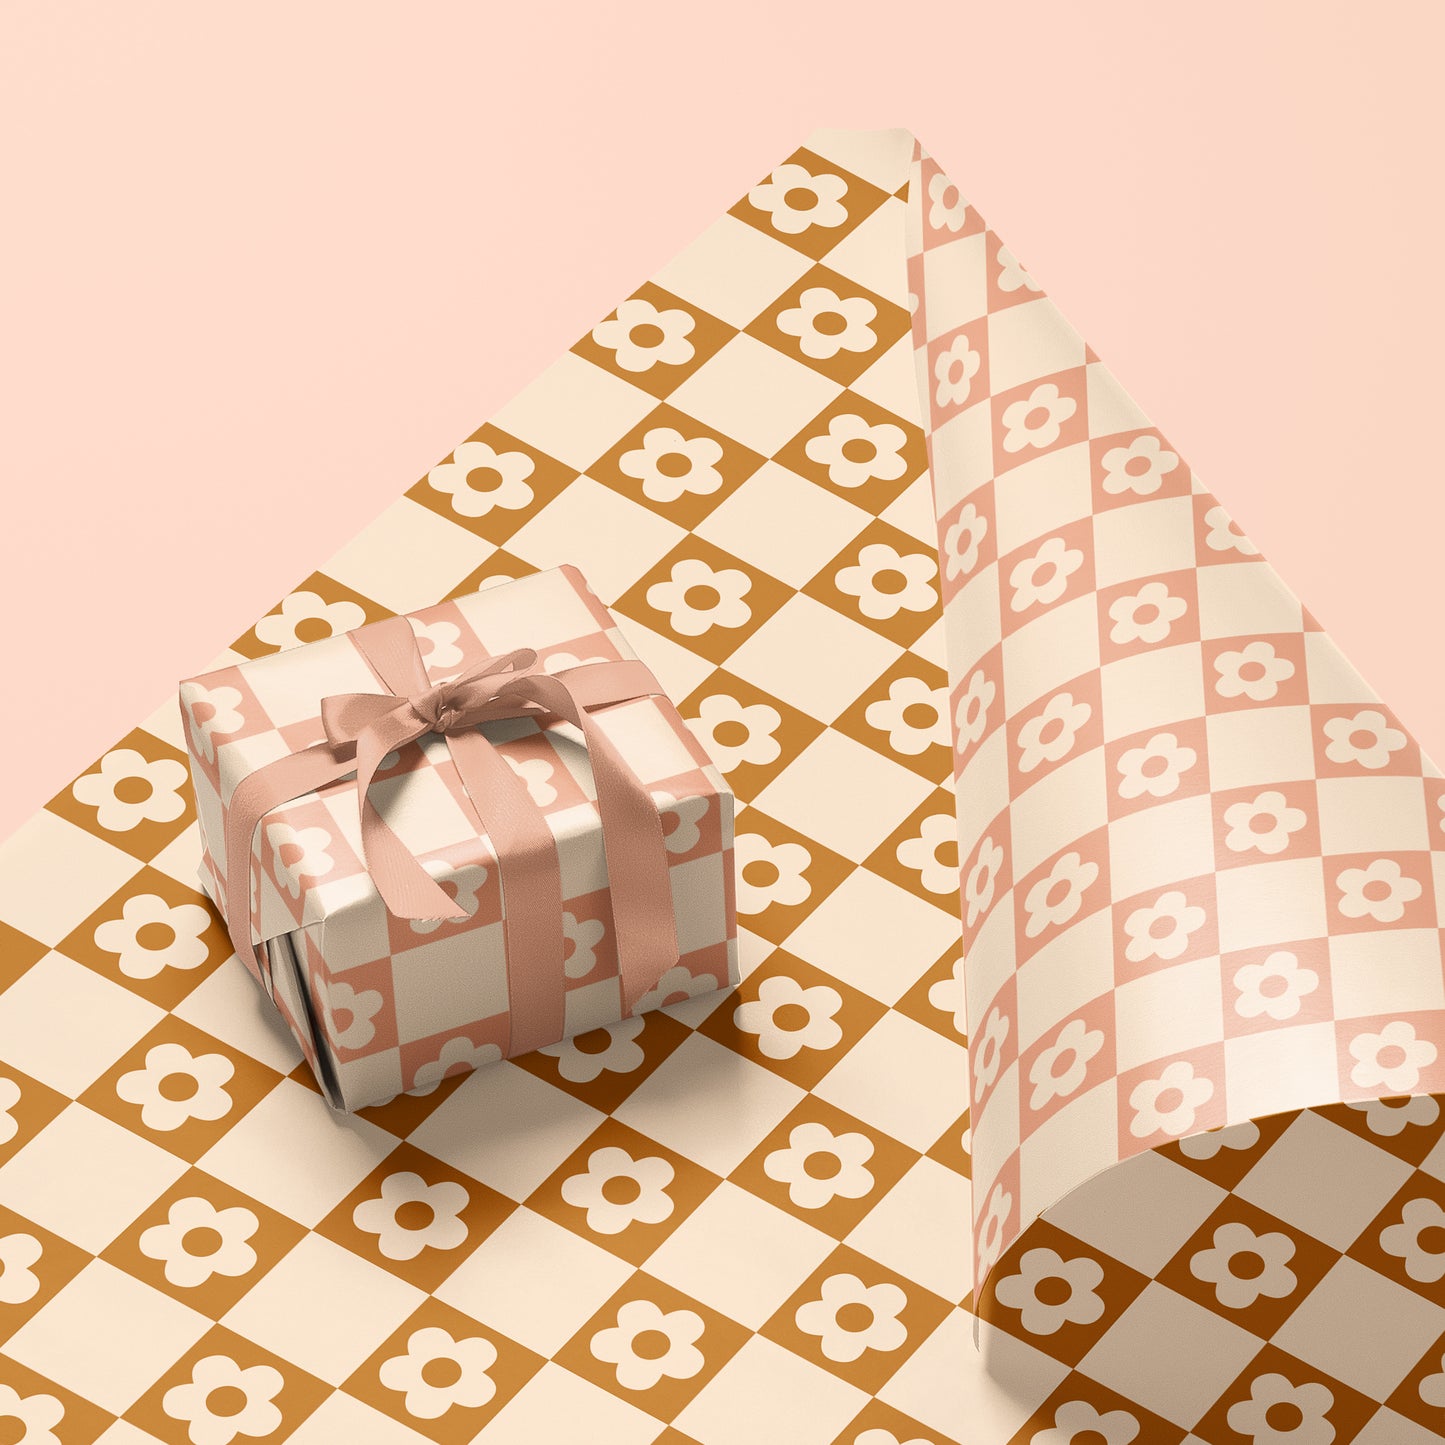 A single sheet of gift wrap with a checker print that has white daisies inside of each square. This gift wrap is reversible and features a white and rust checker print on one side and a light mauve and white print on the other.